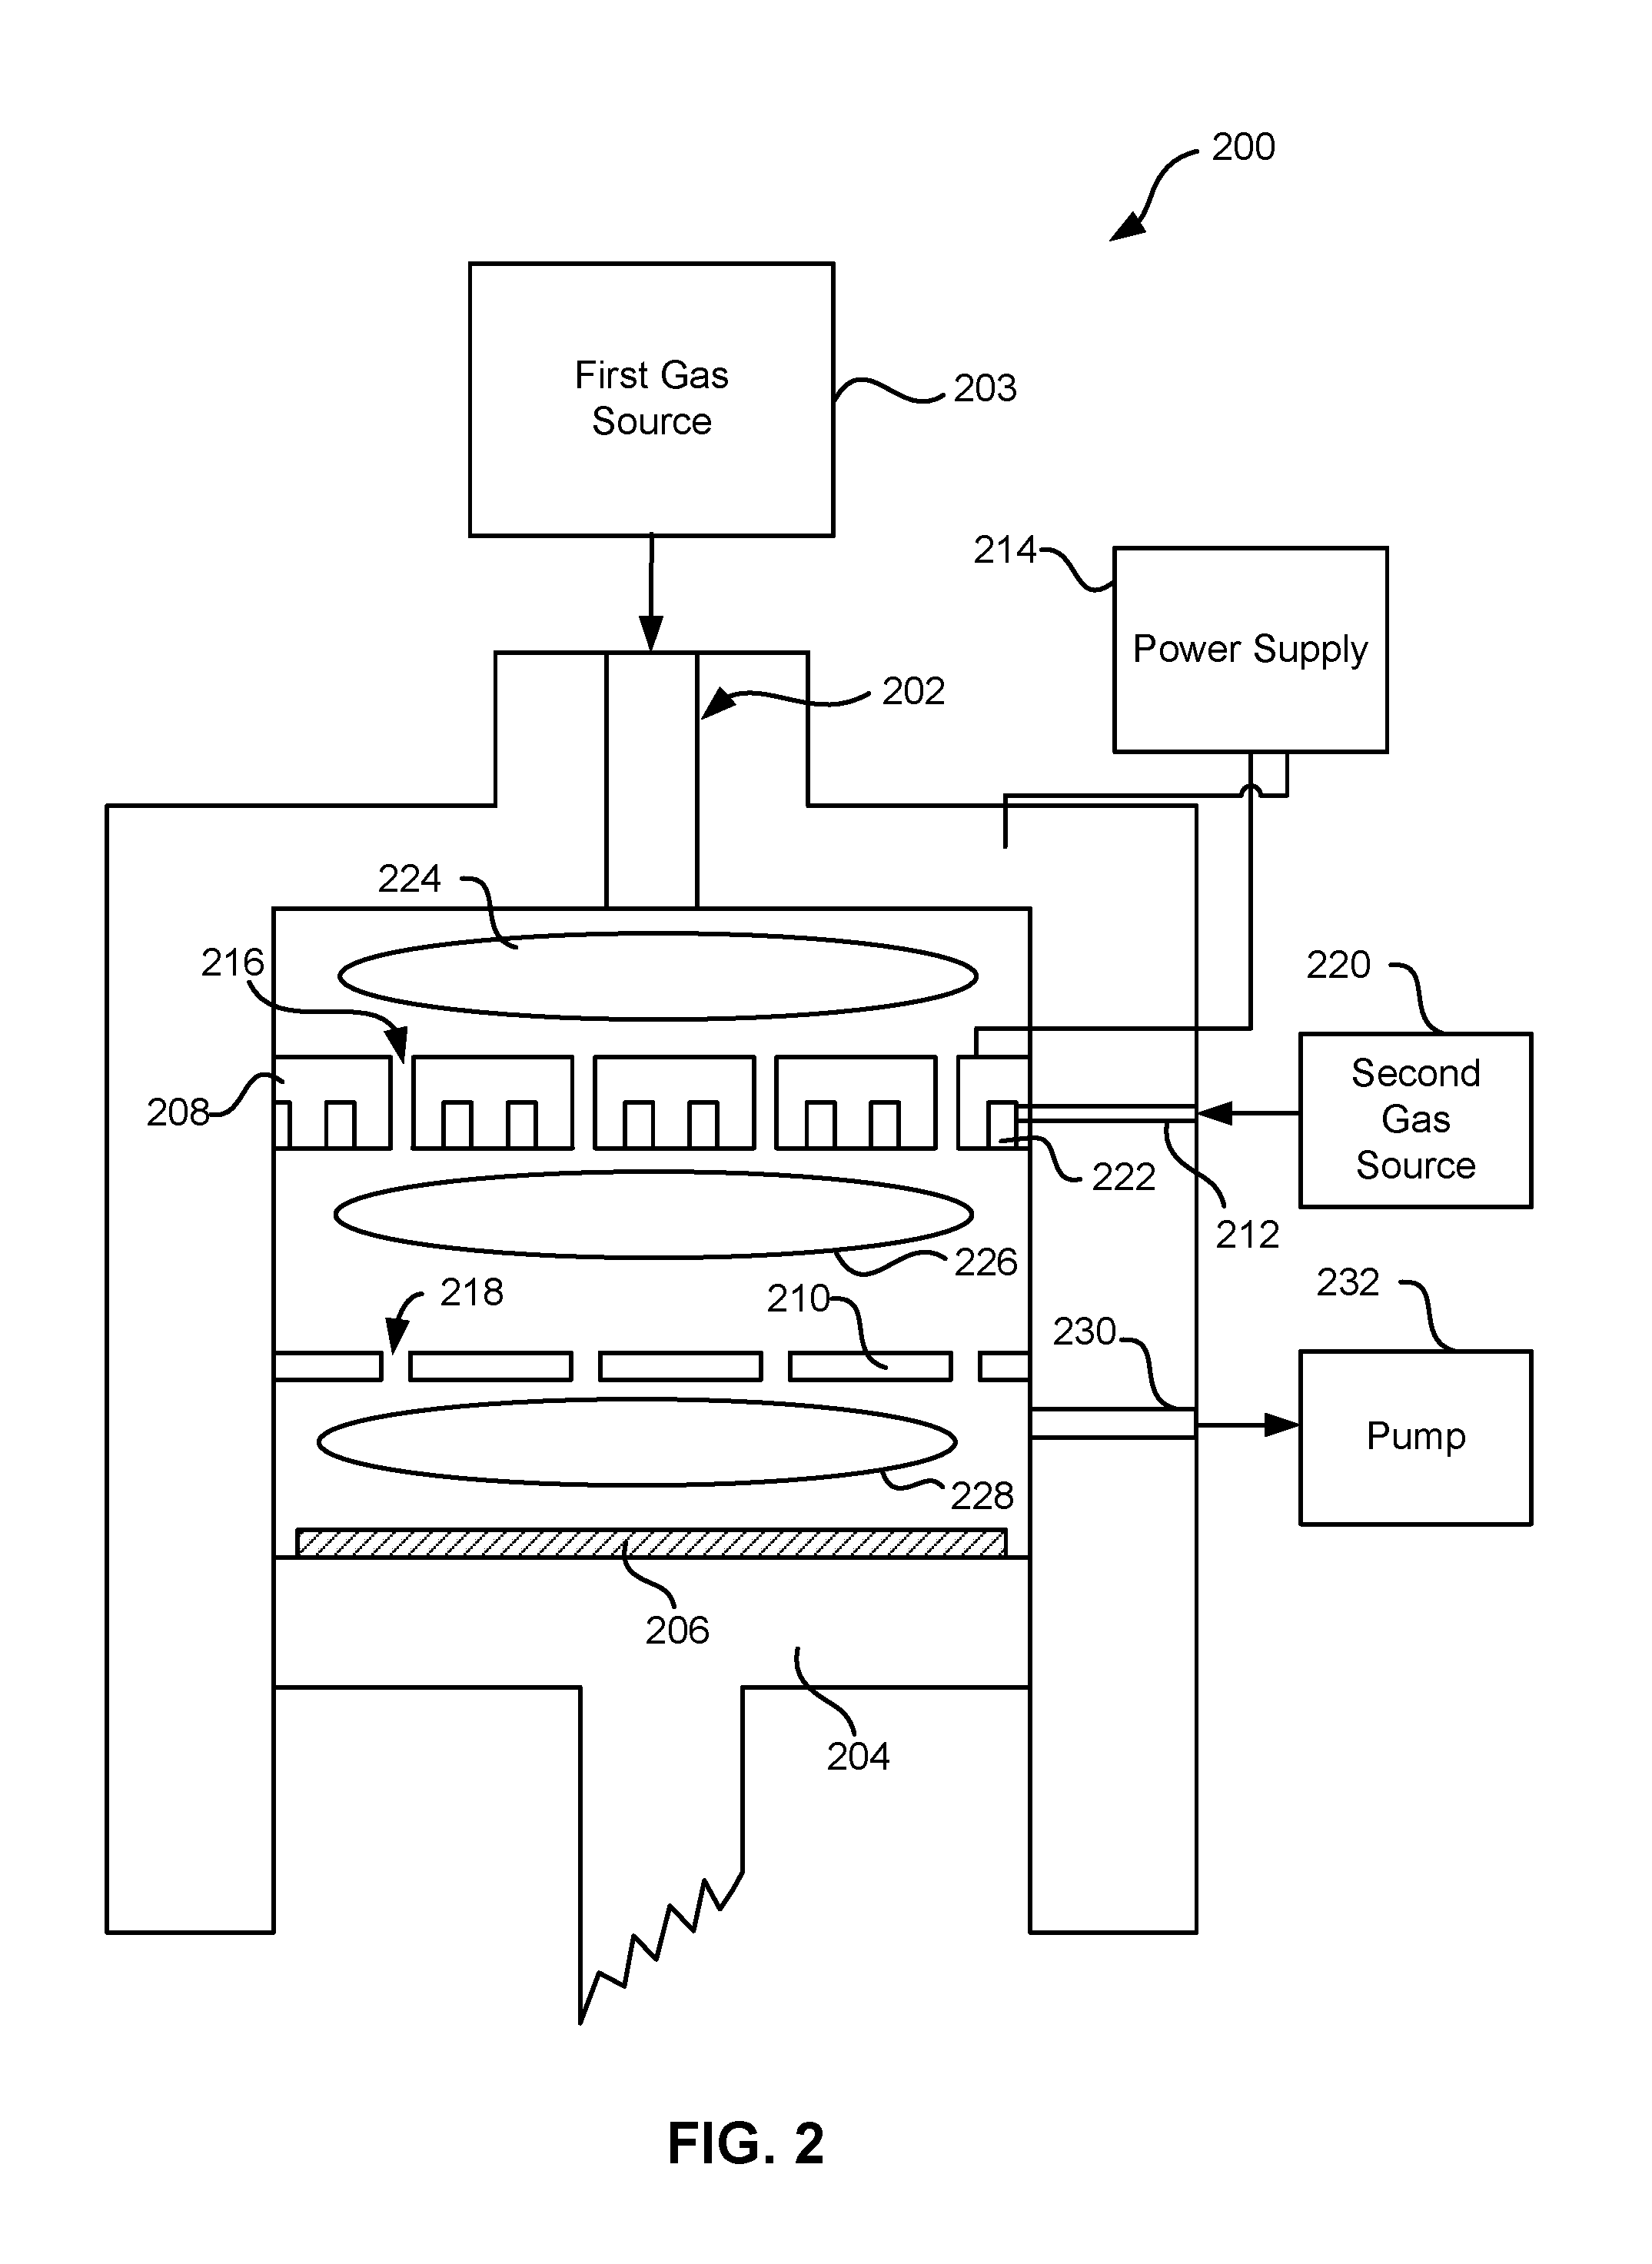 Oxide etch selectivity systems and methods